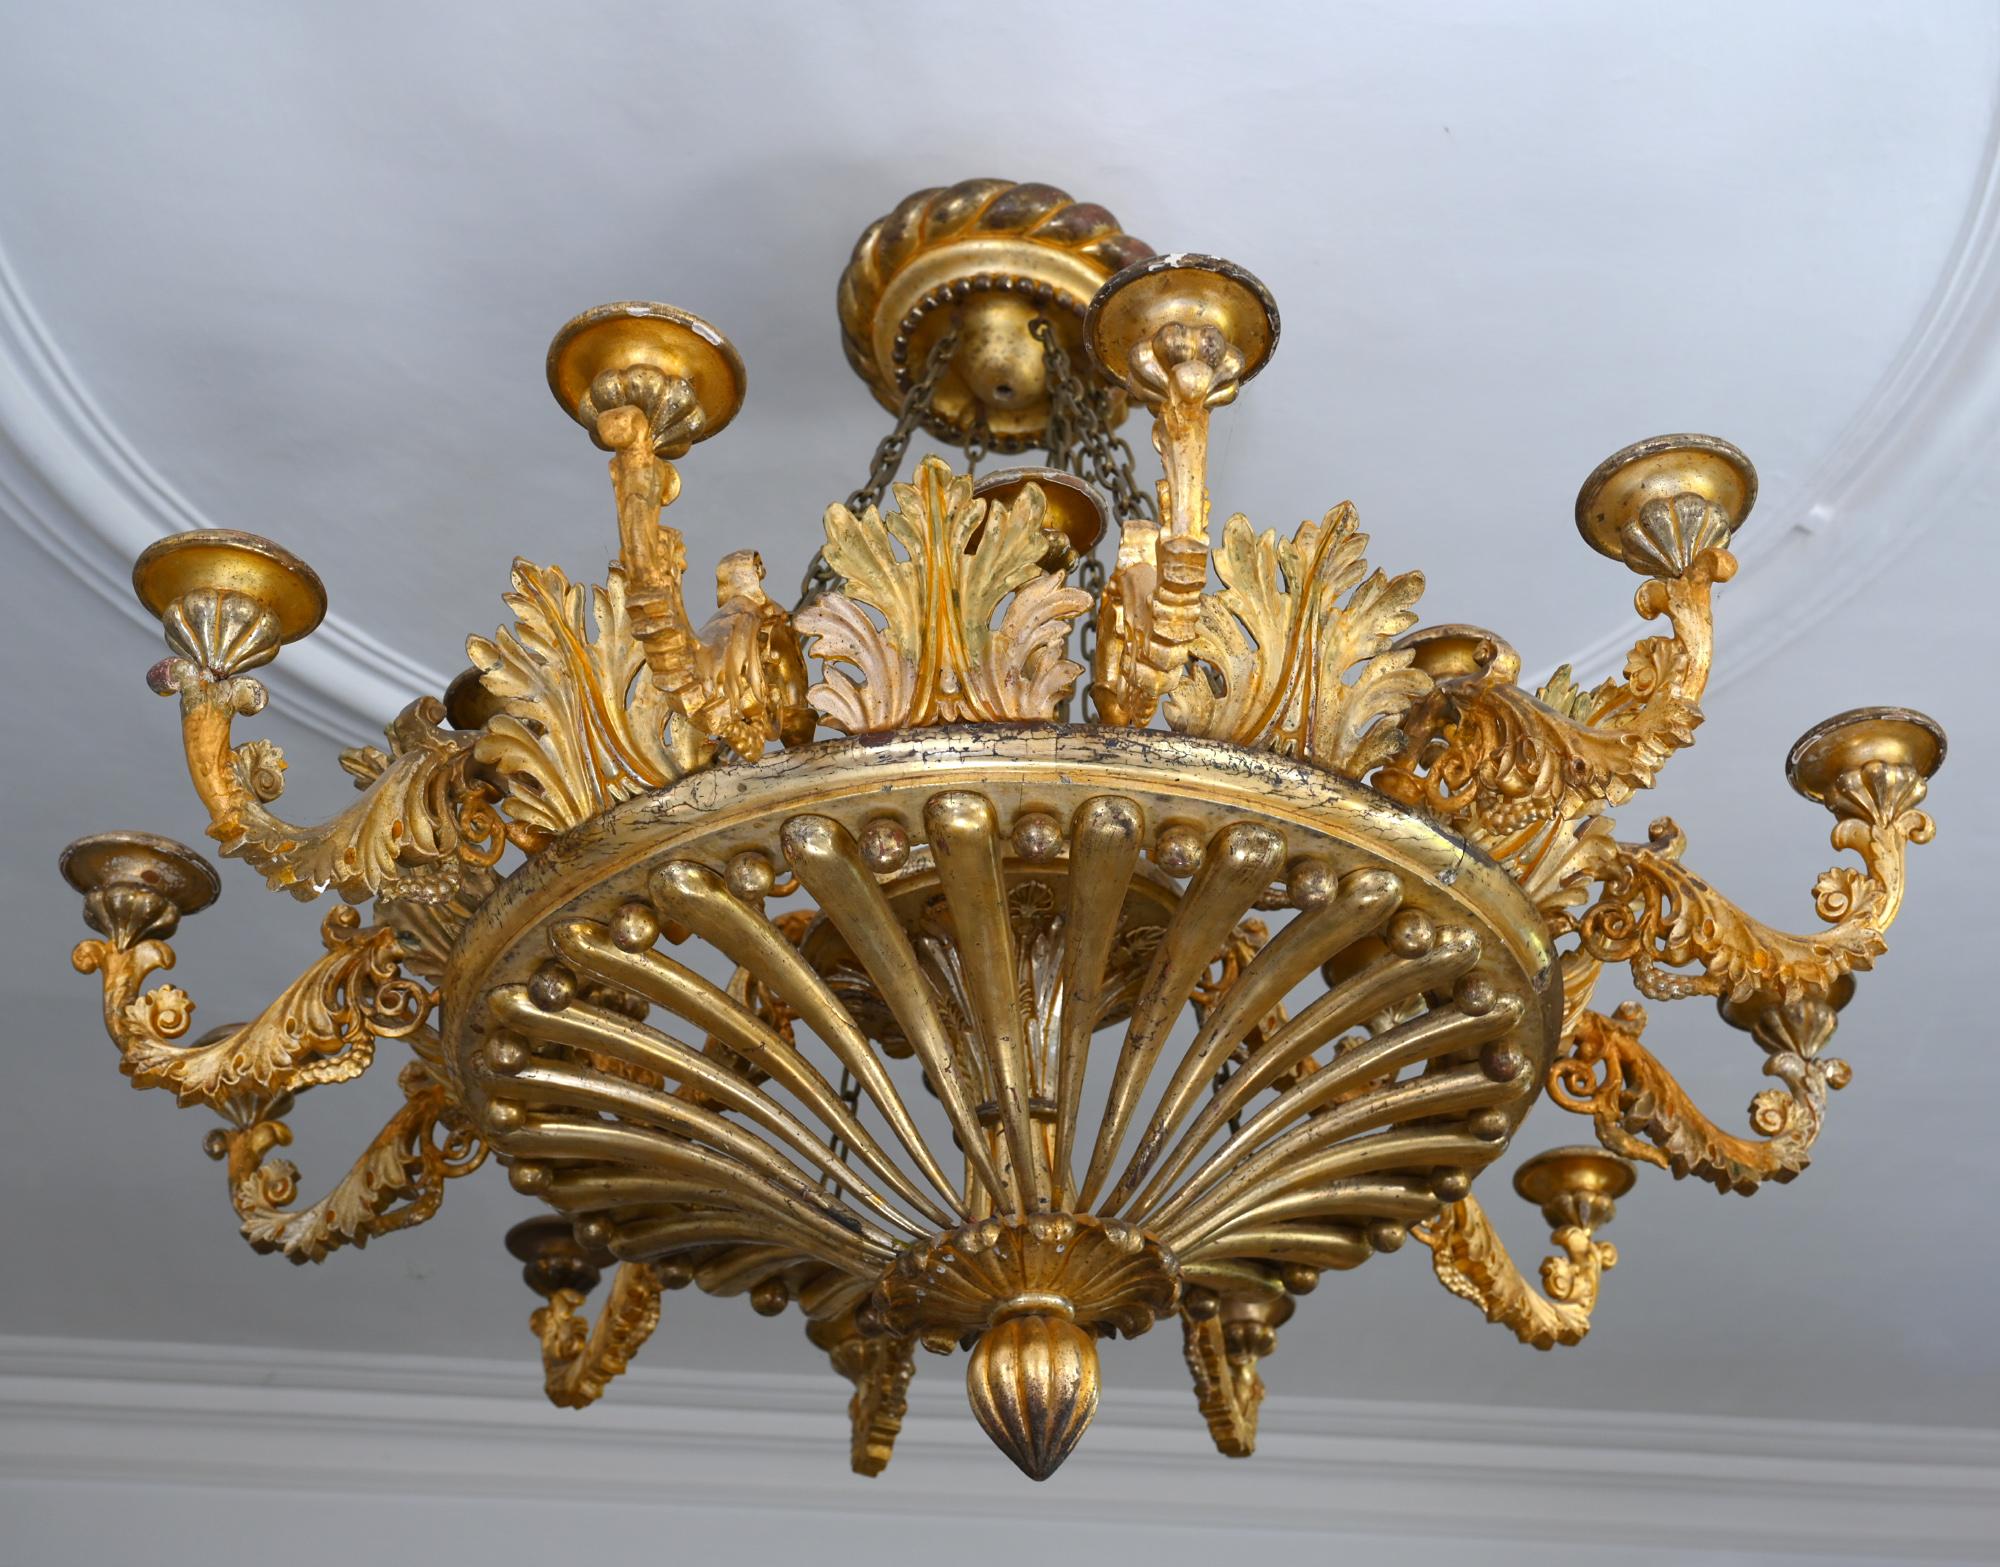 The chandelier is out of the castle Derneburg in Germany and probably a draft by the famous German architect, urban planner and civil engineer, Georg Ludwig Friedrich Laves who lived and worked in Hanover. As the leading architect of the Kingdom of